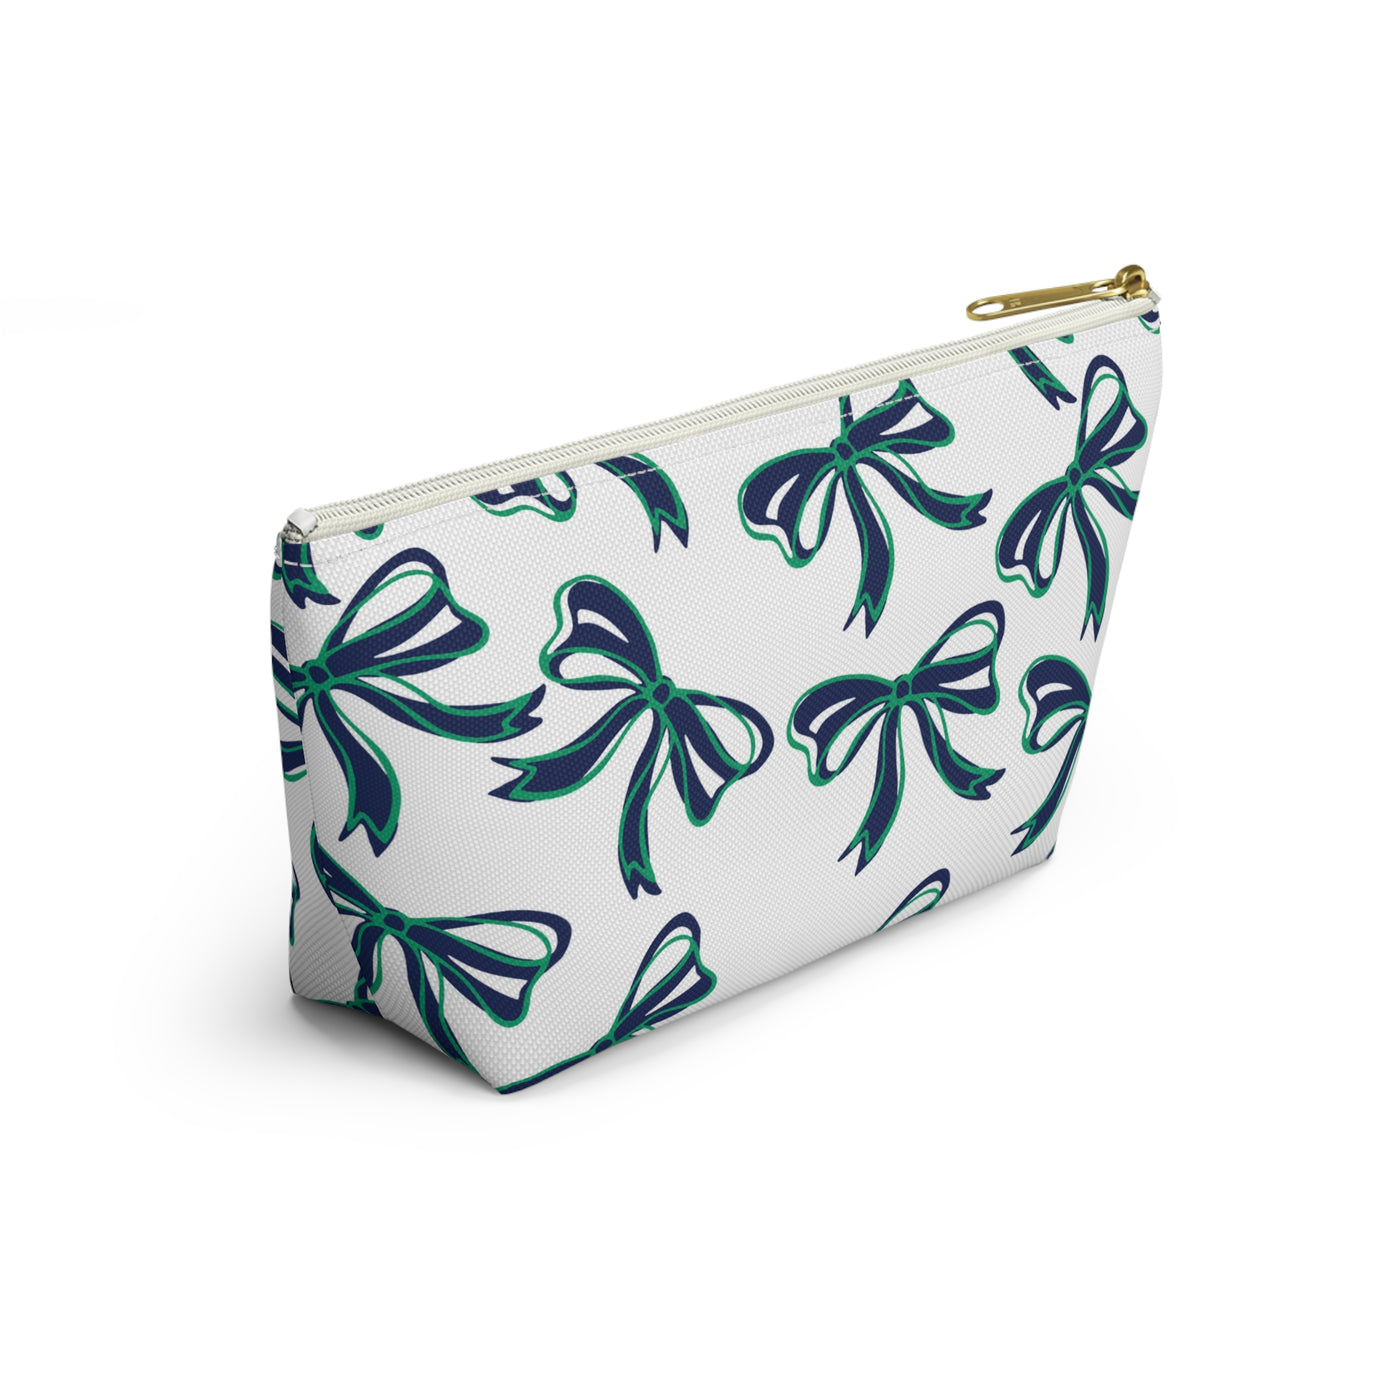 Trendy Bow Makeup Bag - Graduation Gift, Bed Party Gift, Acceptance Gift, College Gift, Notre Dame, green and blue